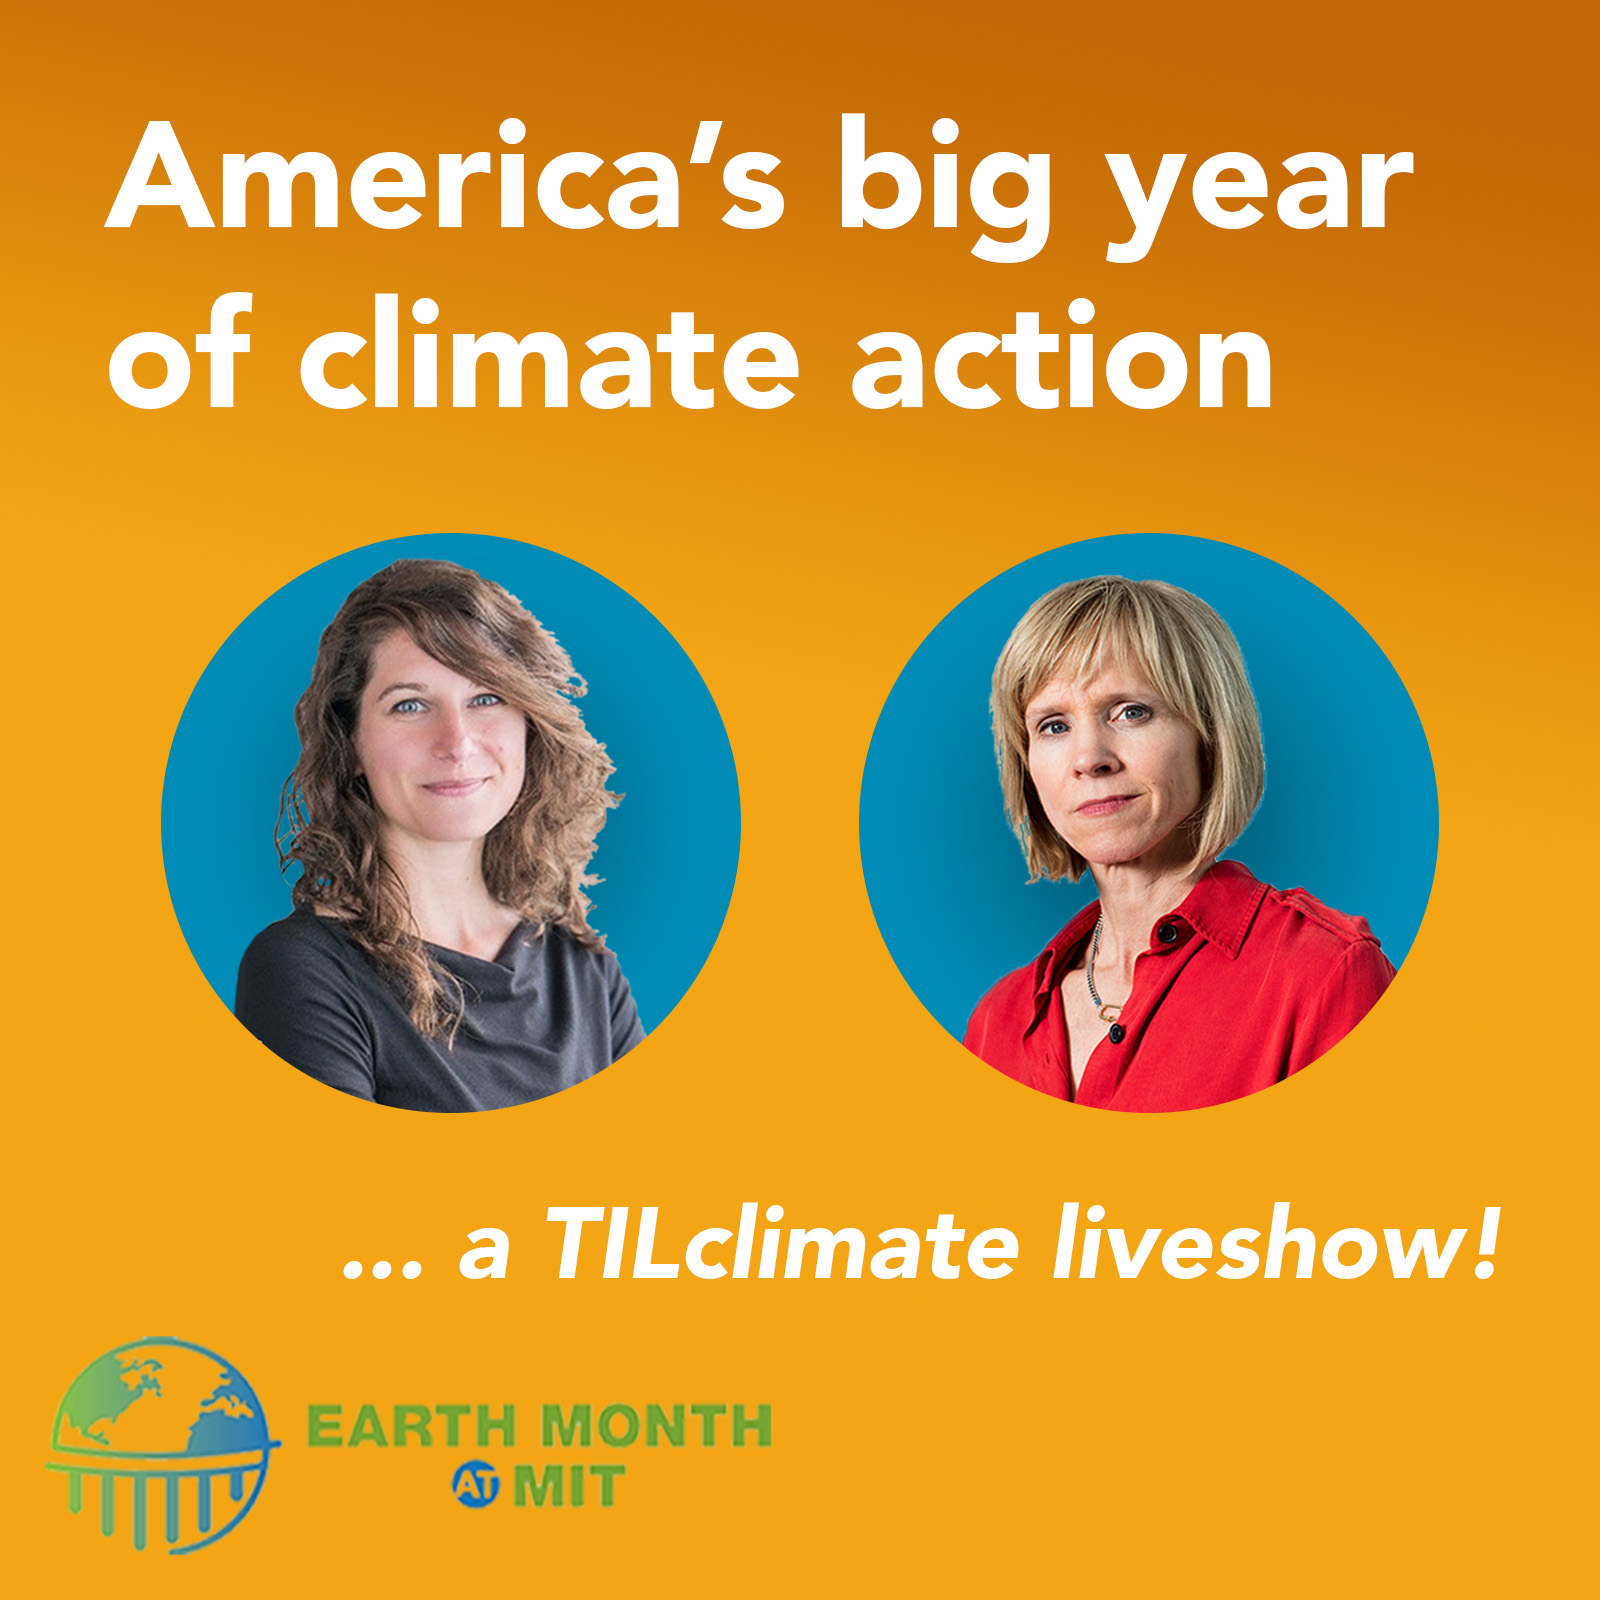 TILclimate Live Show: America’s Big Year of Climate Action